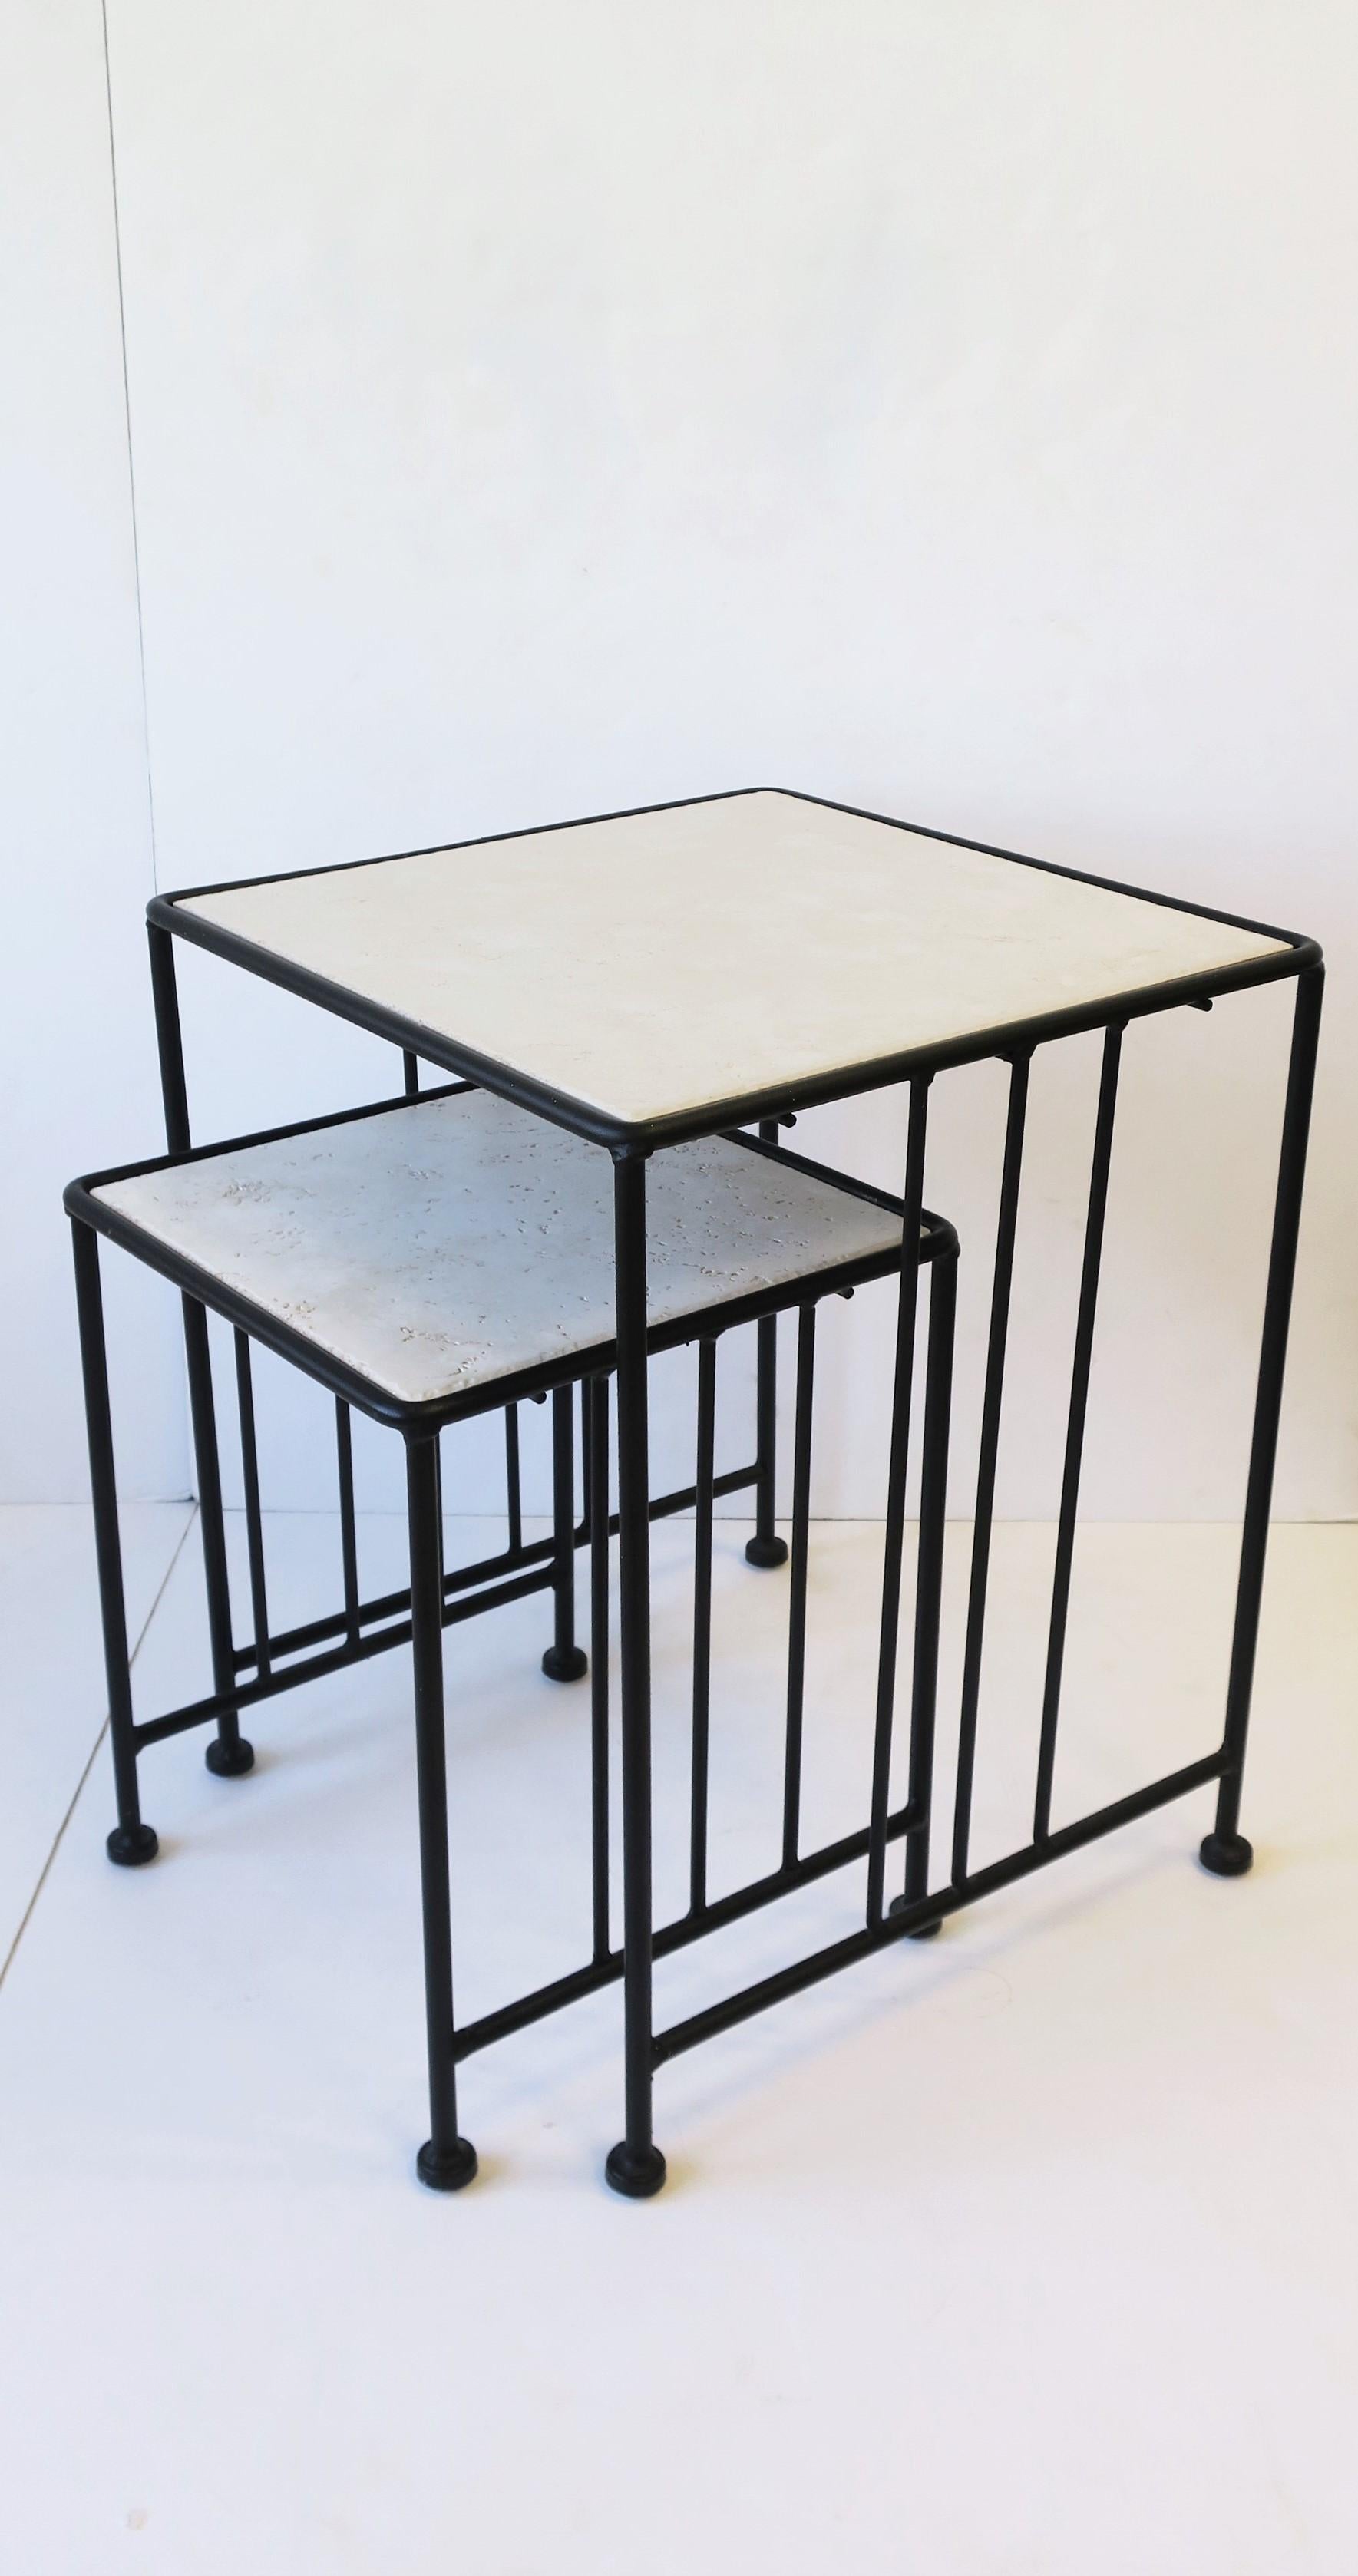 A set of Italian nesting tables in the Art Deco Bauhaus style, circa late 20th century, Italy. Set can work well as an end table (top table) and 'nesting' table great as side/drinks table, small and easy enough to pull-out /move around. Tables can